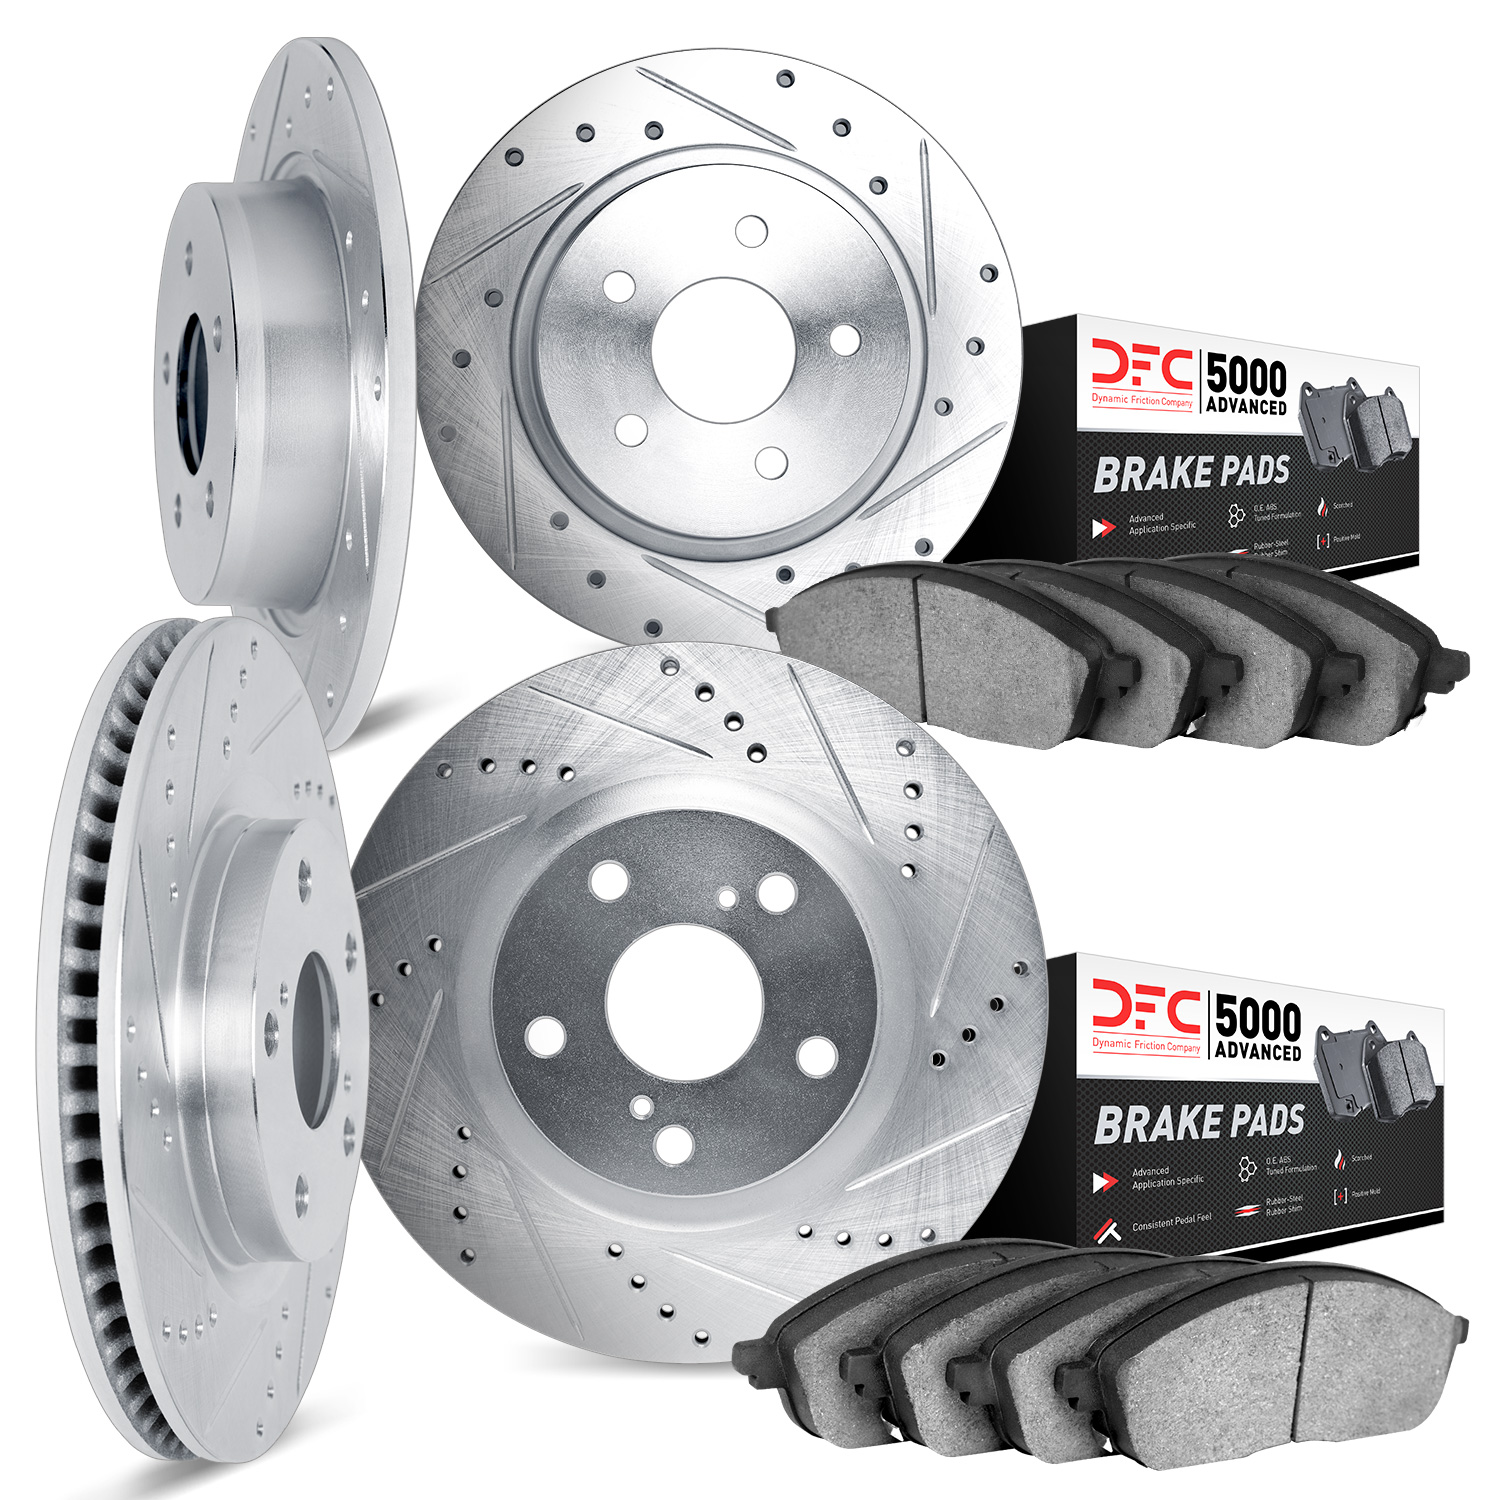 7504-76144 Drilled/Slotted Brake Rotors w/5000 Advanced Brake Pads Kit [Silver], 1994-1995 Lexus/Toyota/Scion, Position: Front a